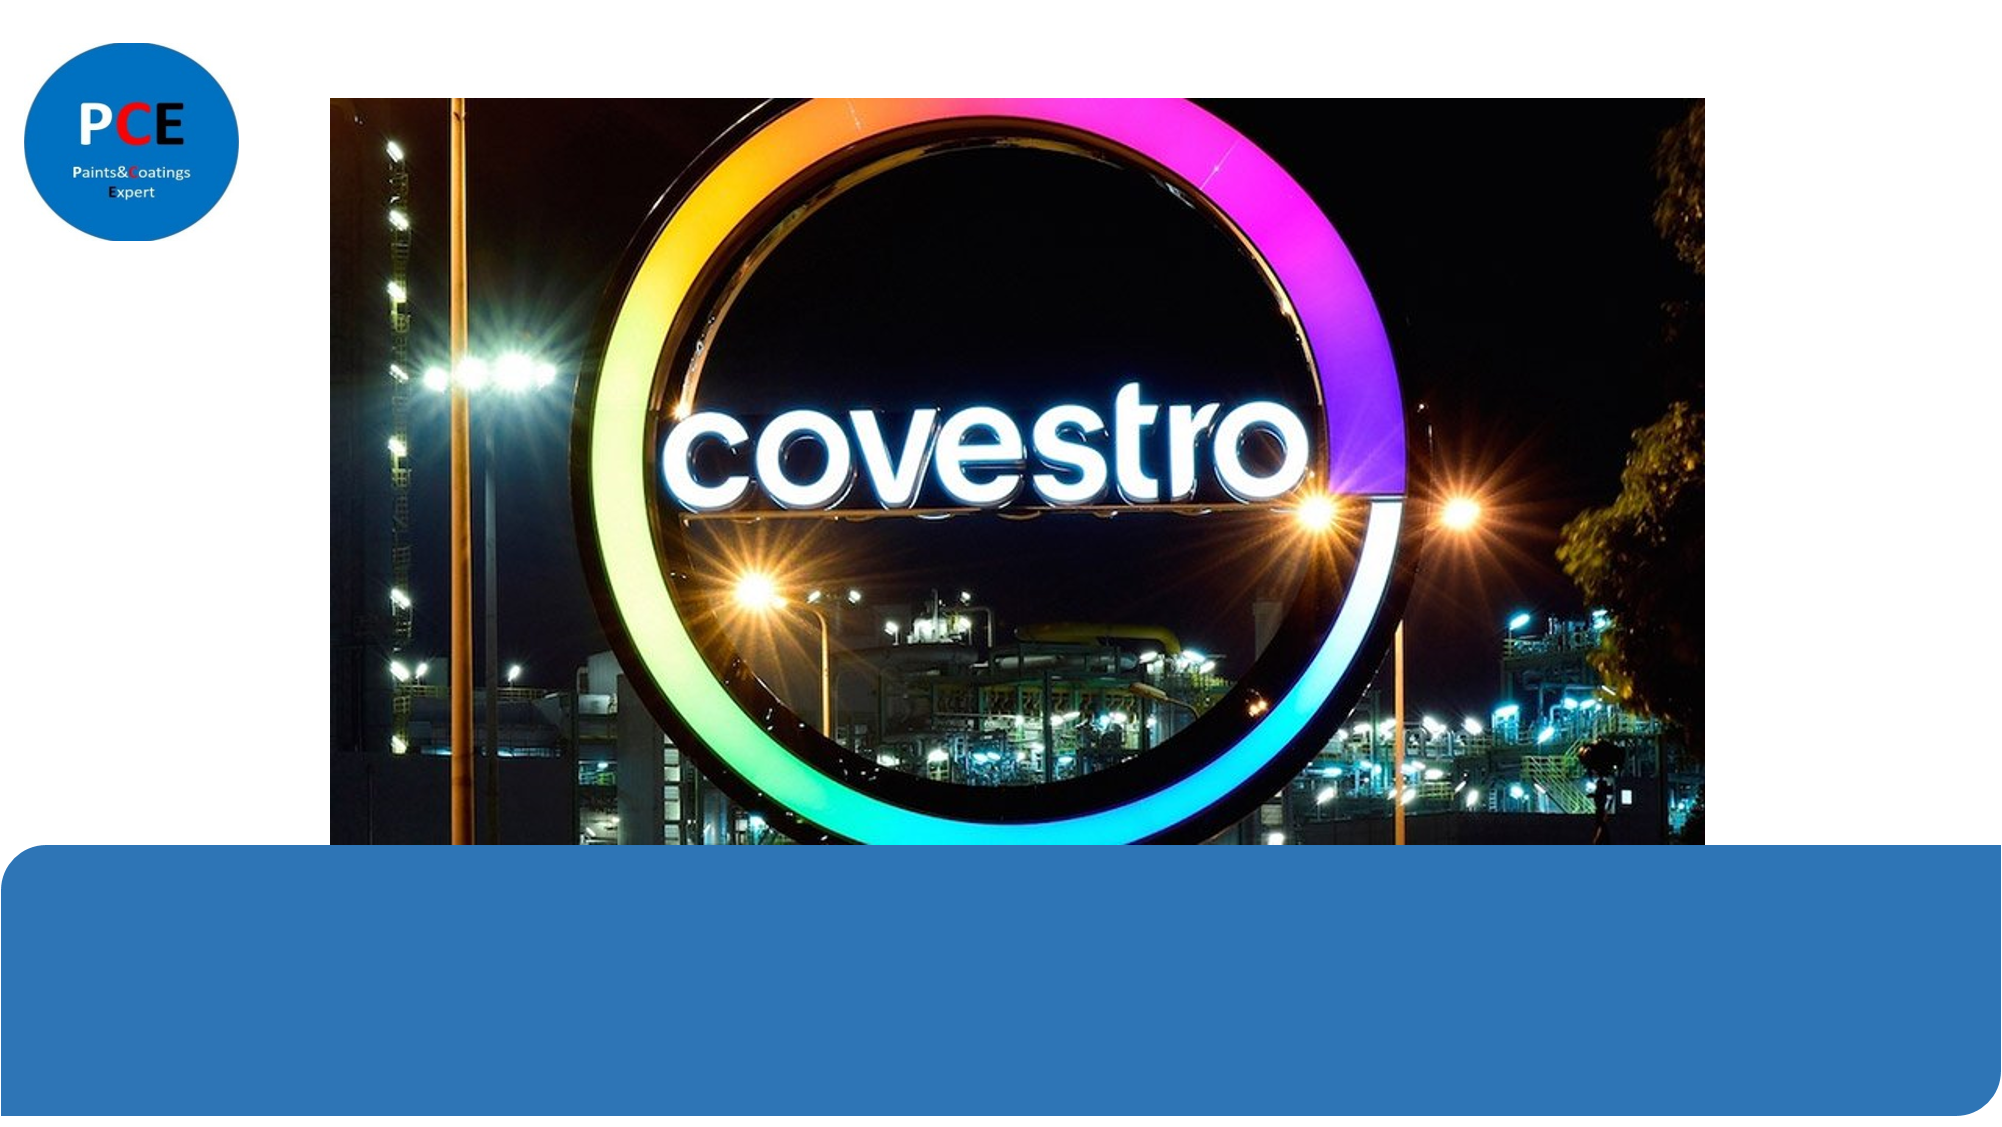 EnvisionTEC and Covestro collaborate on material and printer solutions for DLP 3D printing tooling applications￼